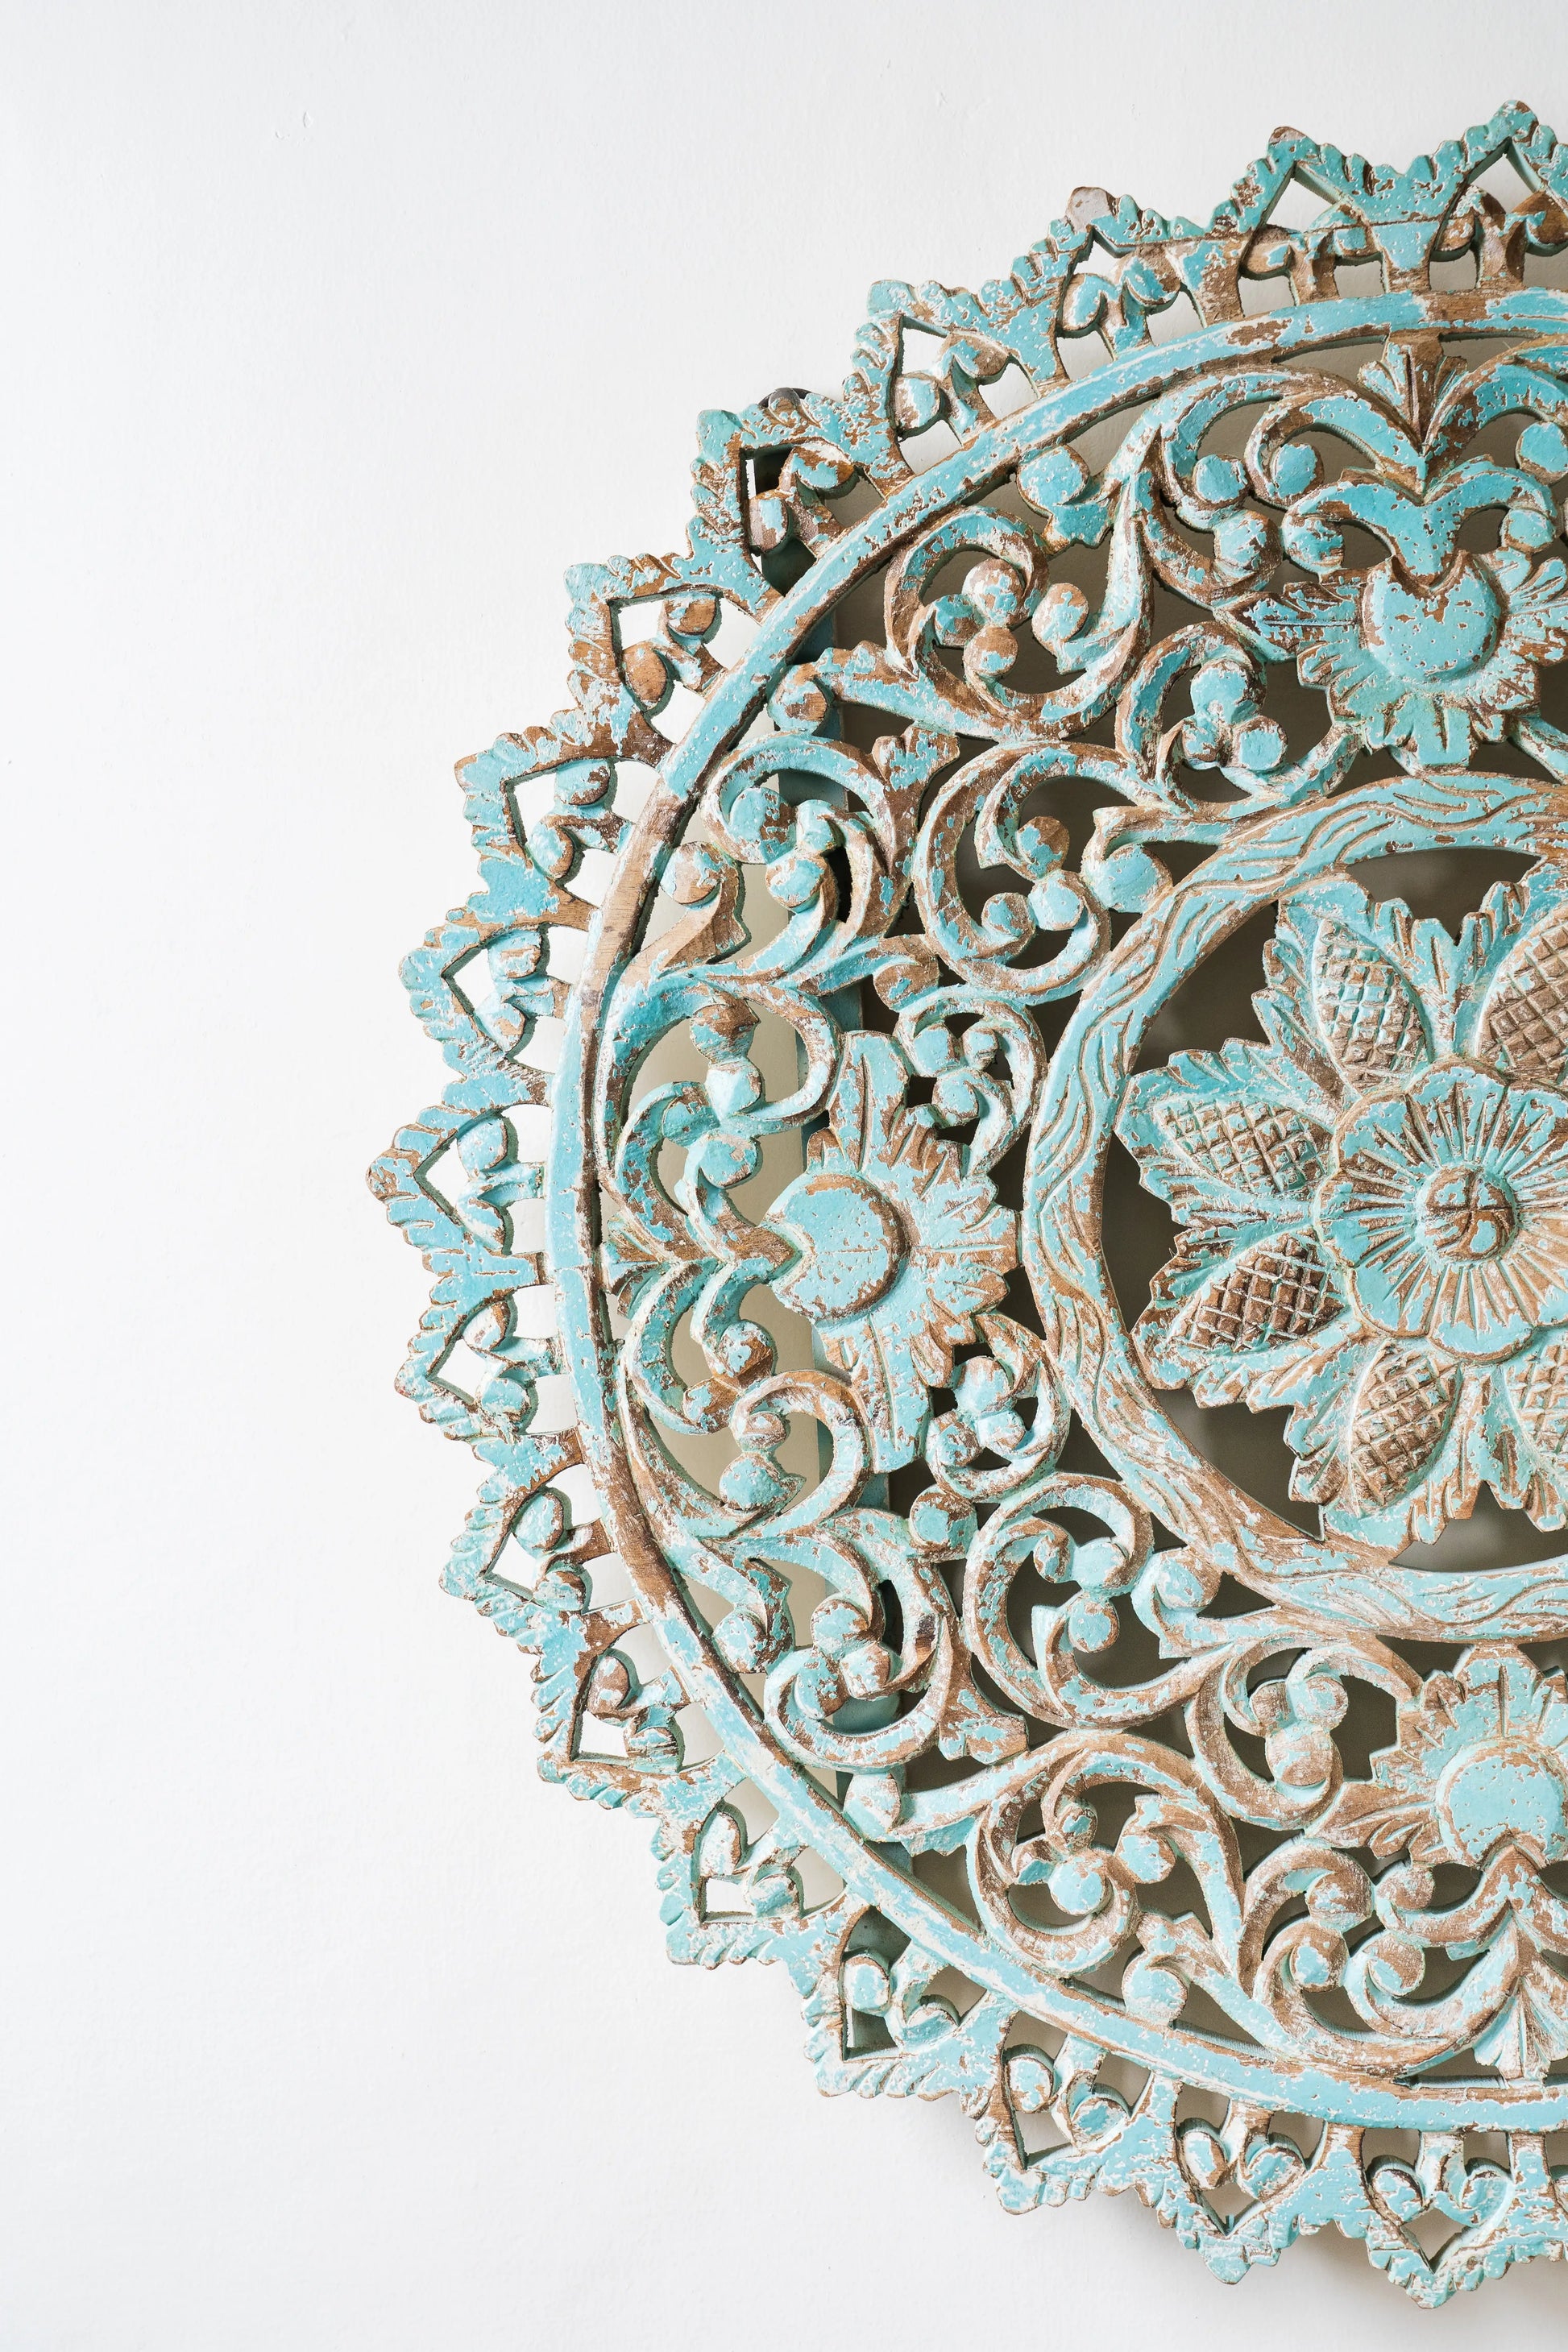 VINTAGE CARVED TURQUOISE WALL DECOR,  Antique-style wall décor, Artistic wall panel, Decorative wooden panel, Detailed carving wall panel, Handcrafted wall décor, Home accent décor, Preserved wooden wall décor, Rustic charm wall décor, Rustic turquoise wall décor, Turquoise home décor, Turquoise wall art, Unique wall décor, Versatile wooden panel, Vintage carved turquoise wall décor, Vintage-inspired wall décor, Wall hanging panel, Wooden panel with hook,tesu 